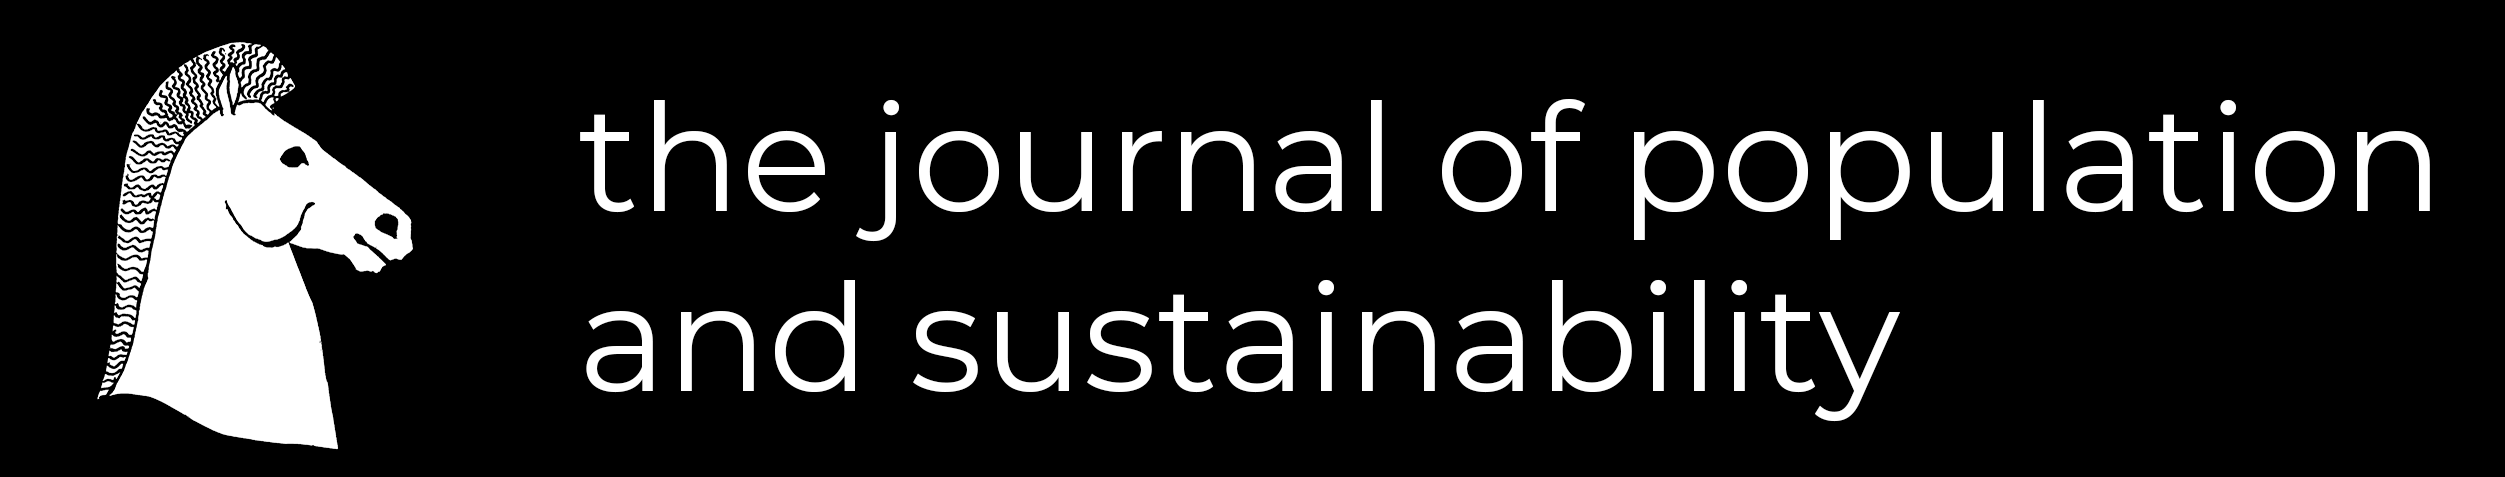 the journal of population and sustainability